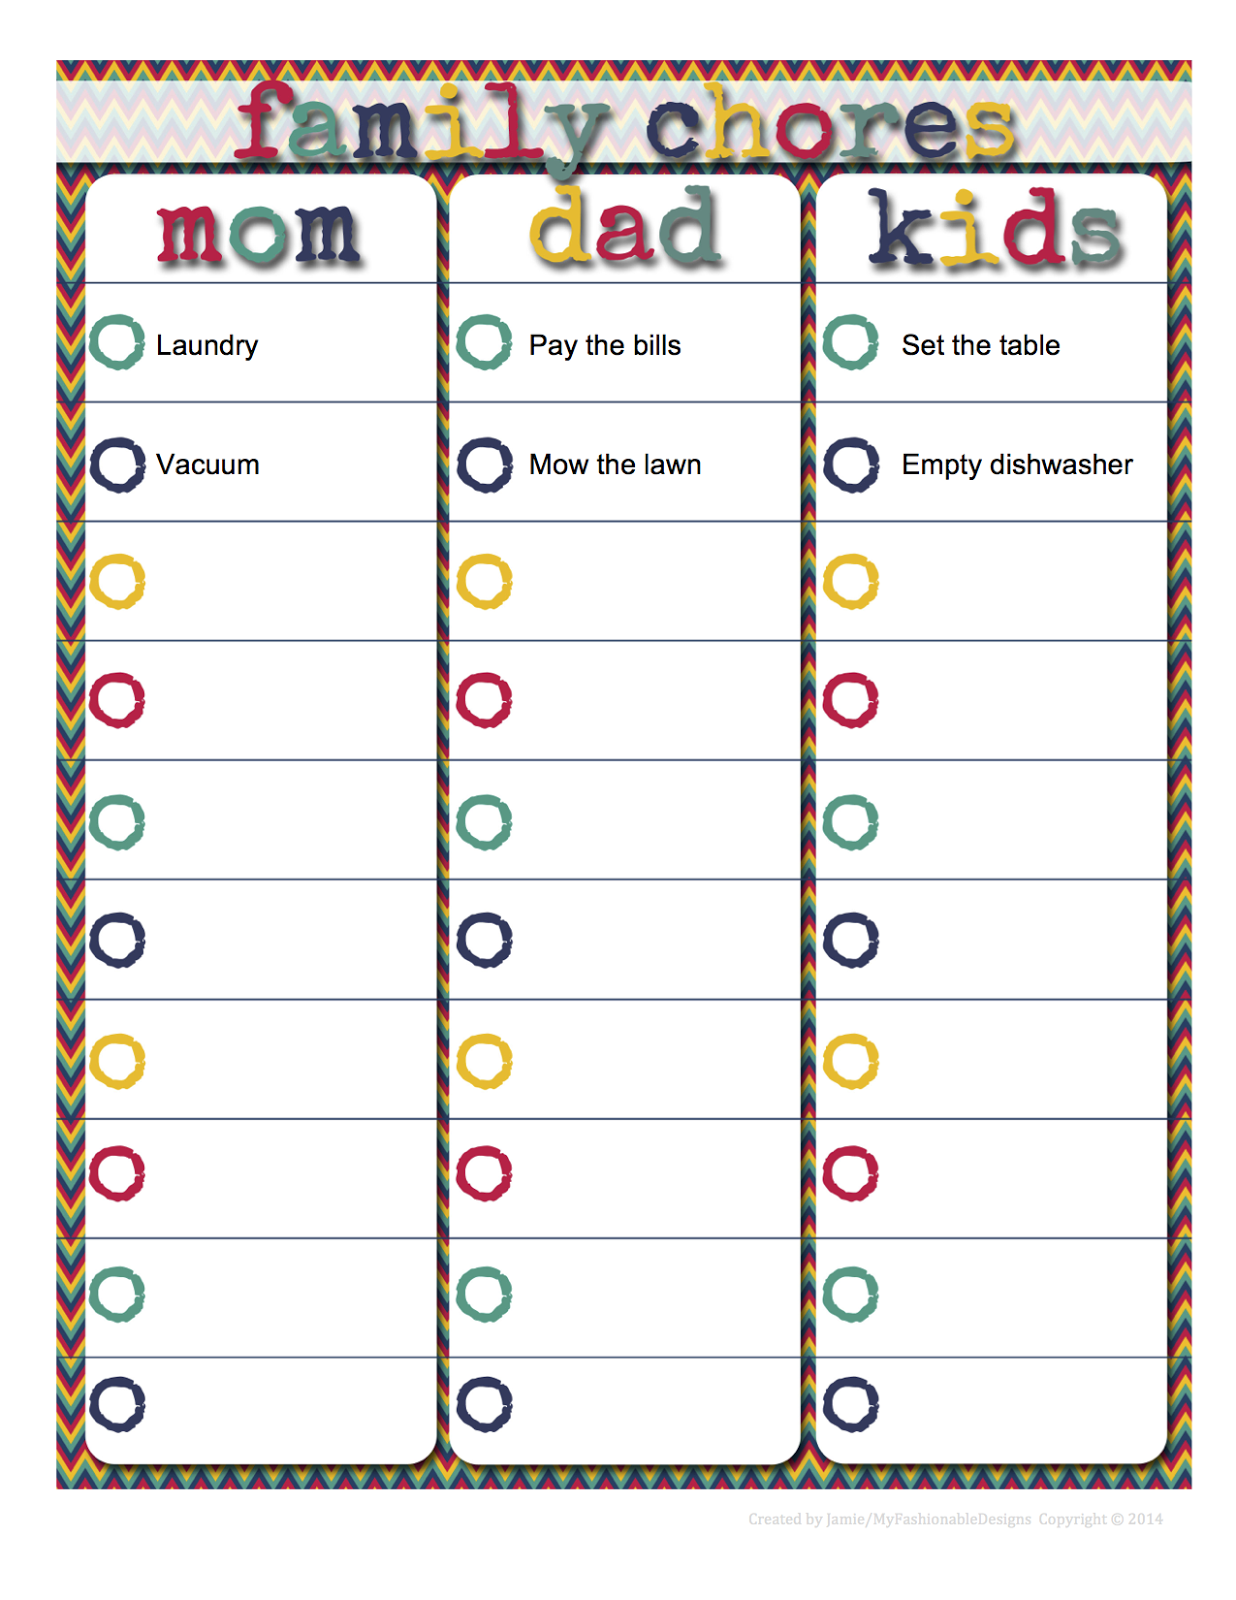 my-fashionable-designs-family-chore-chart-editable-in-word-free